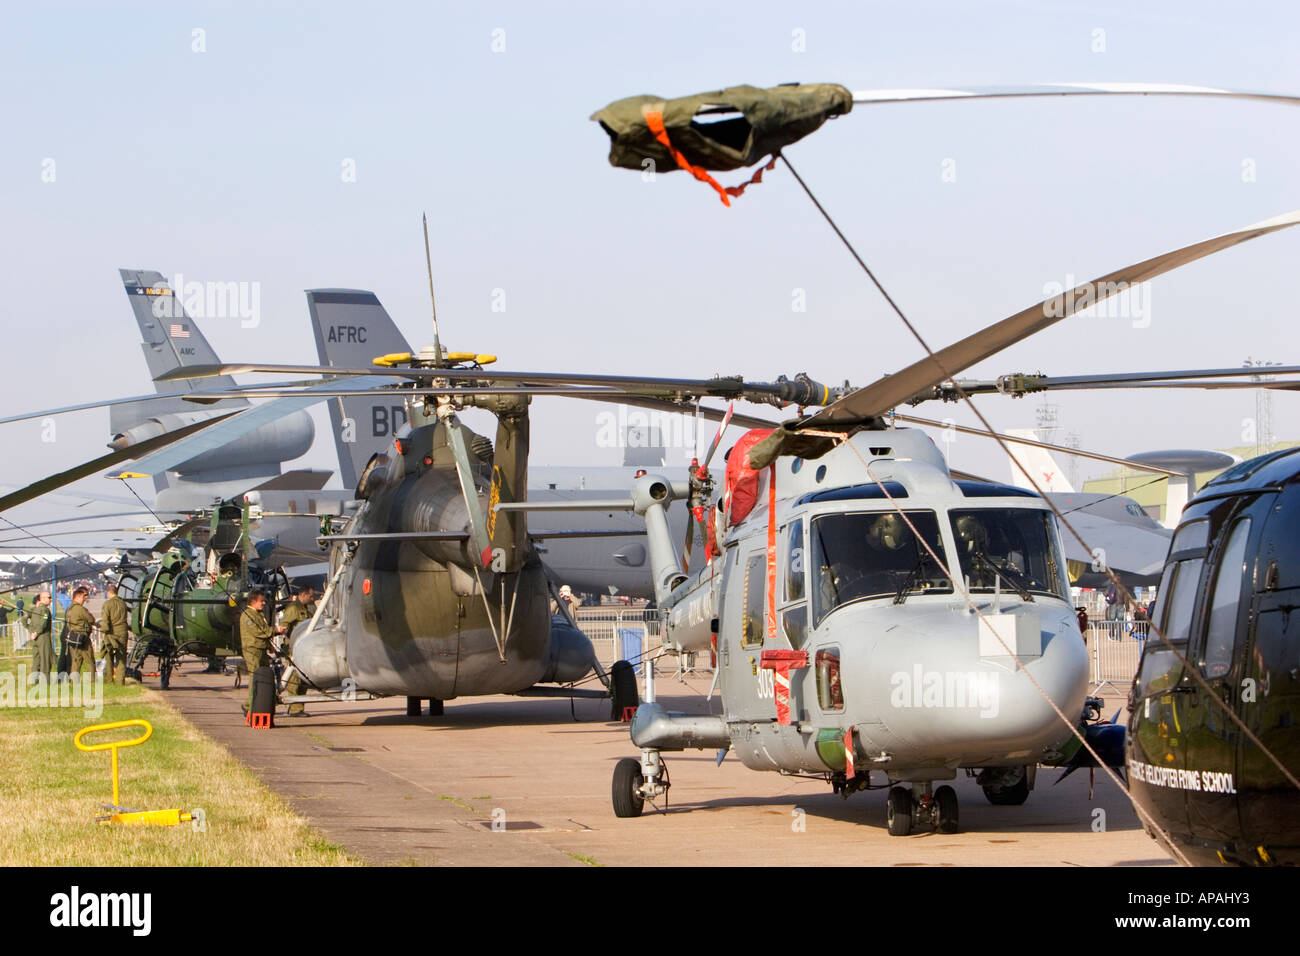 Flight line of military helicopters with tied down rotor blades at Leuchars Airshow 2006 Stock Photo